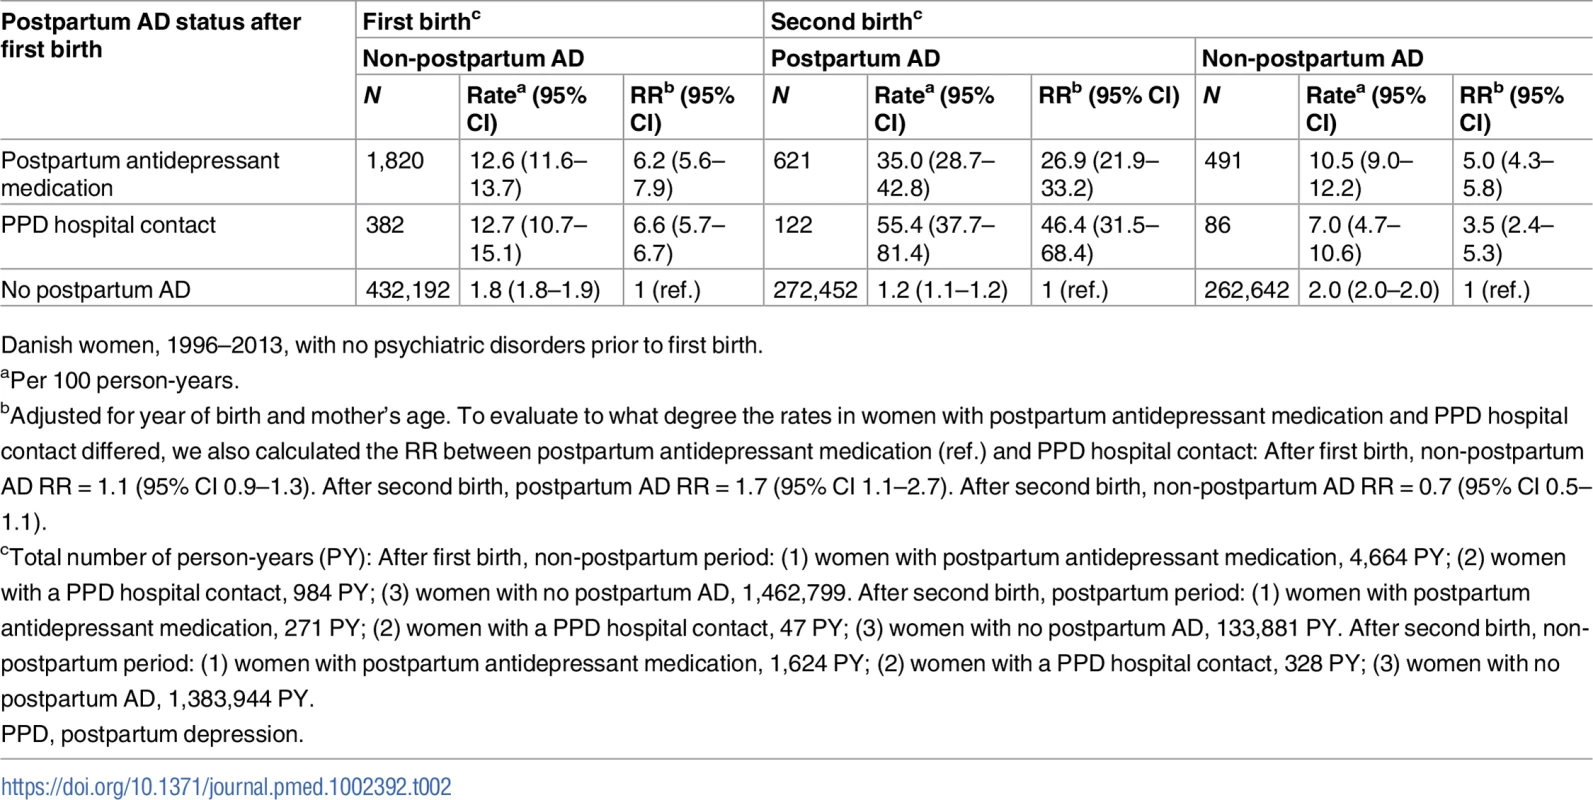 Rates and rate ratios (RRs) of non-postpartum and postpartum affective disorder (AD) after first and second birth depending on postpartum AD status after first birth.